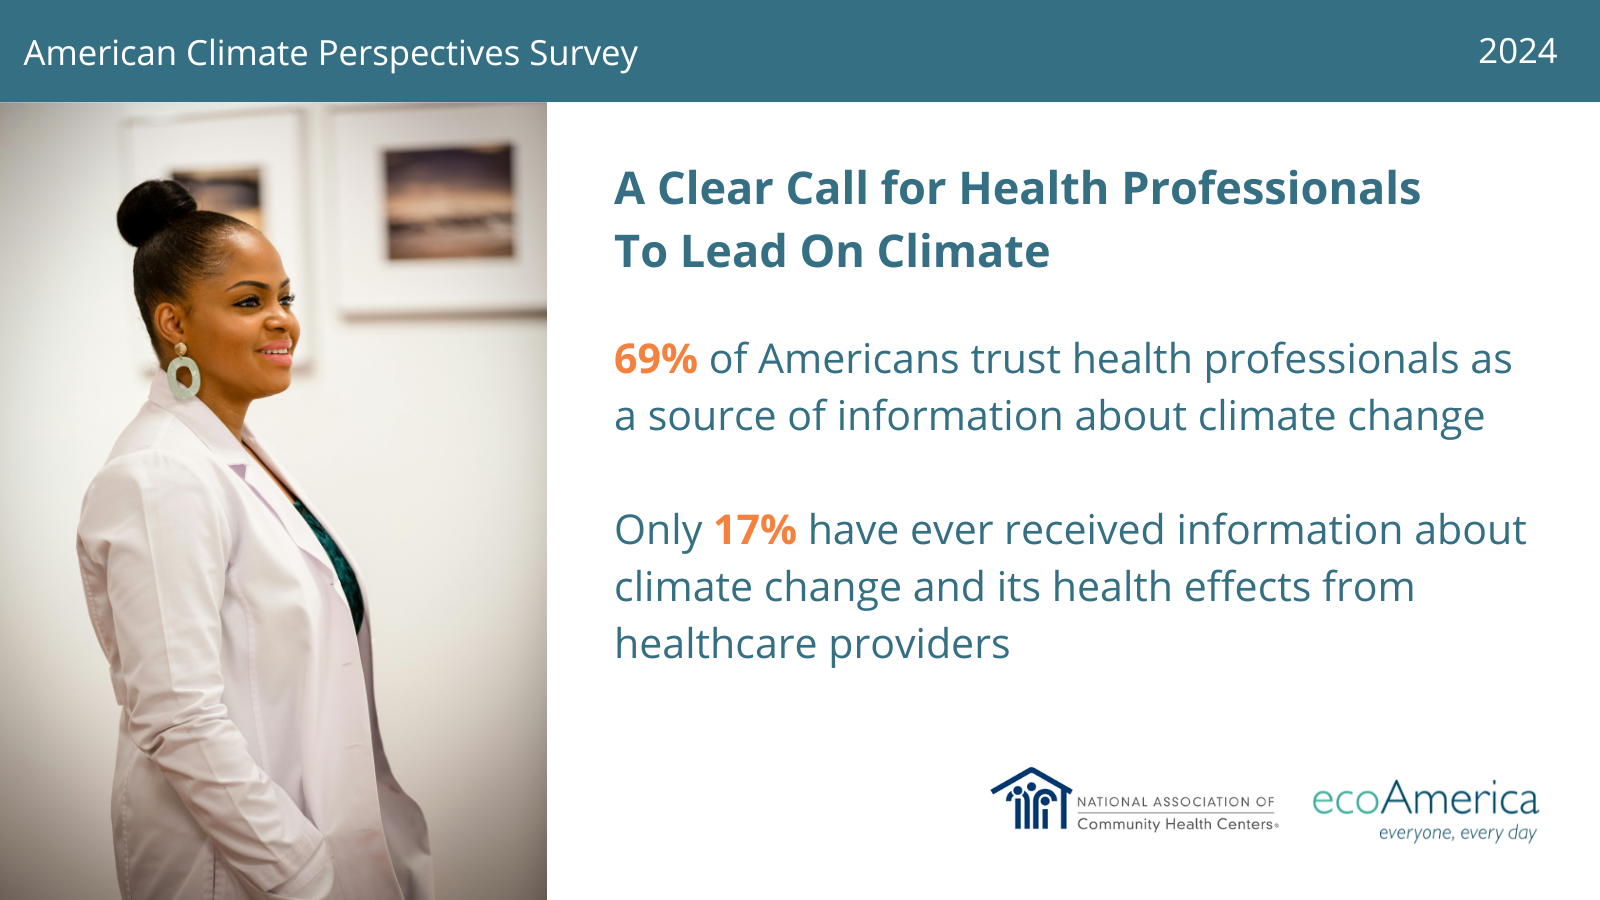 New Research Findings: Americans Want Climate Leadership from the Health Sector